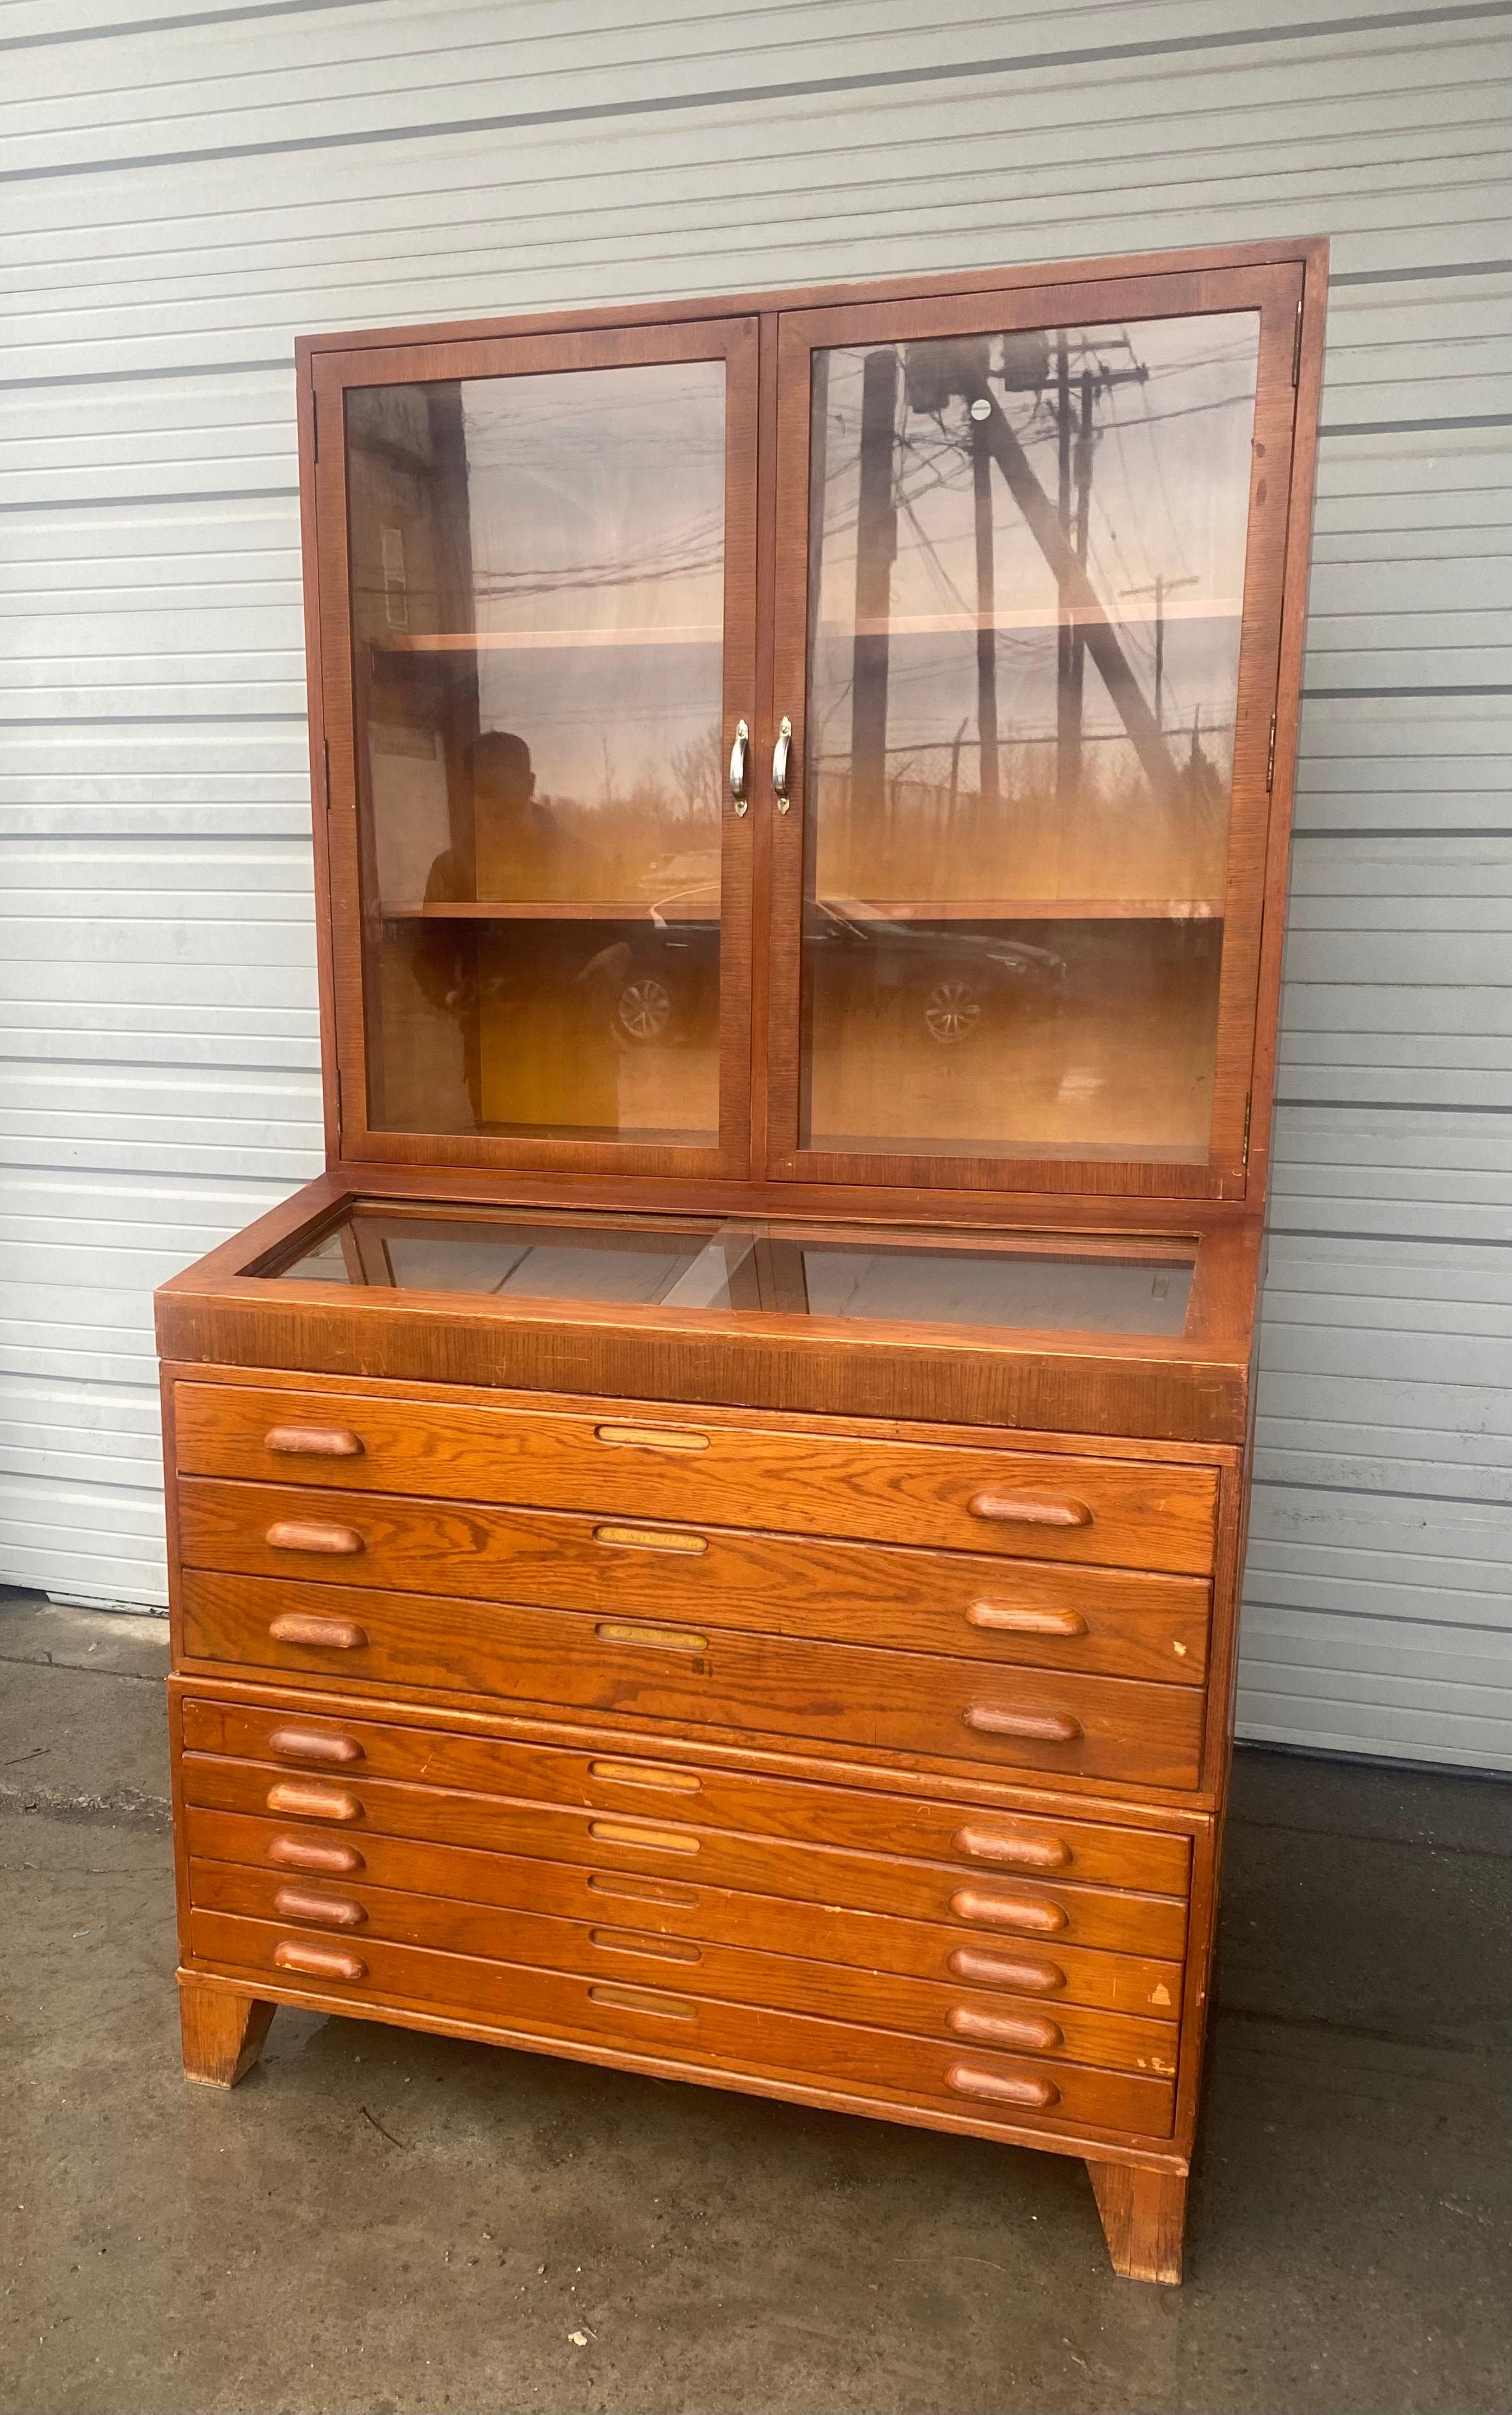 Unusual Modular ,Stacking 1940s Hamiton Blueprint / map display cabinet .3 section stacking .Sliding glass display with glass cabinet doors, large multi-drawer flat file base.  hAND DELIVERY avail to New York City or anywhere en route from Buffalo NY